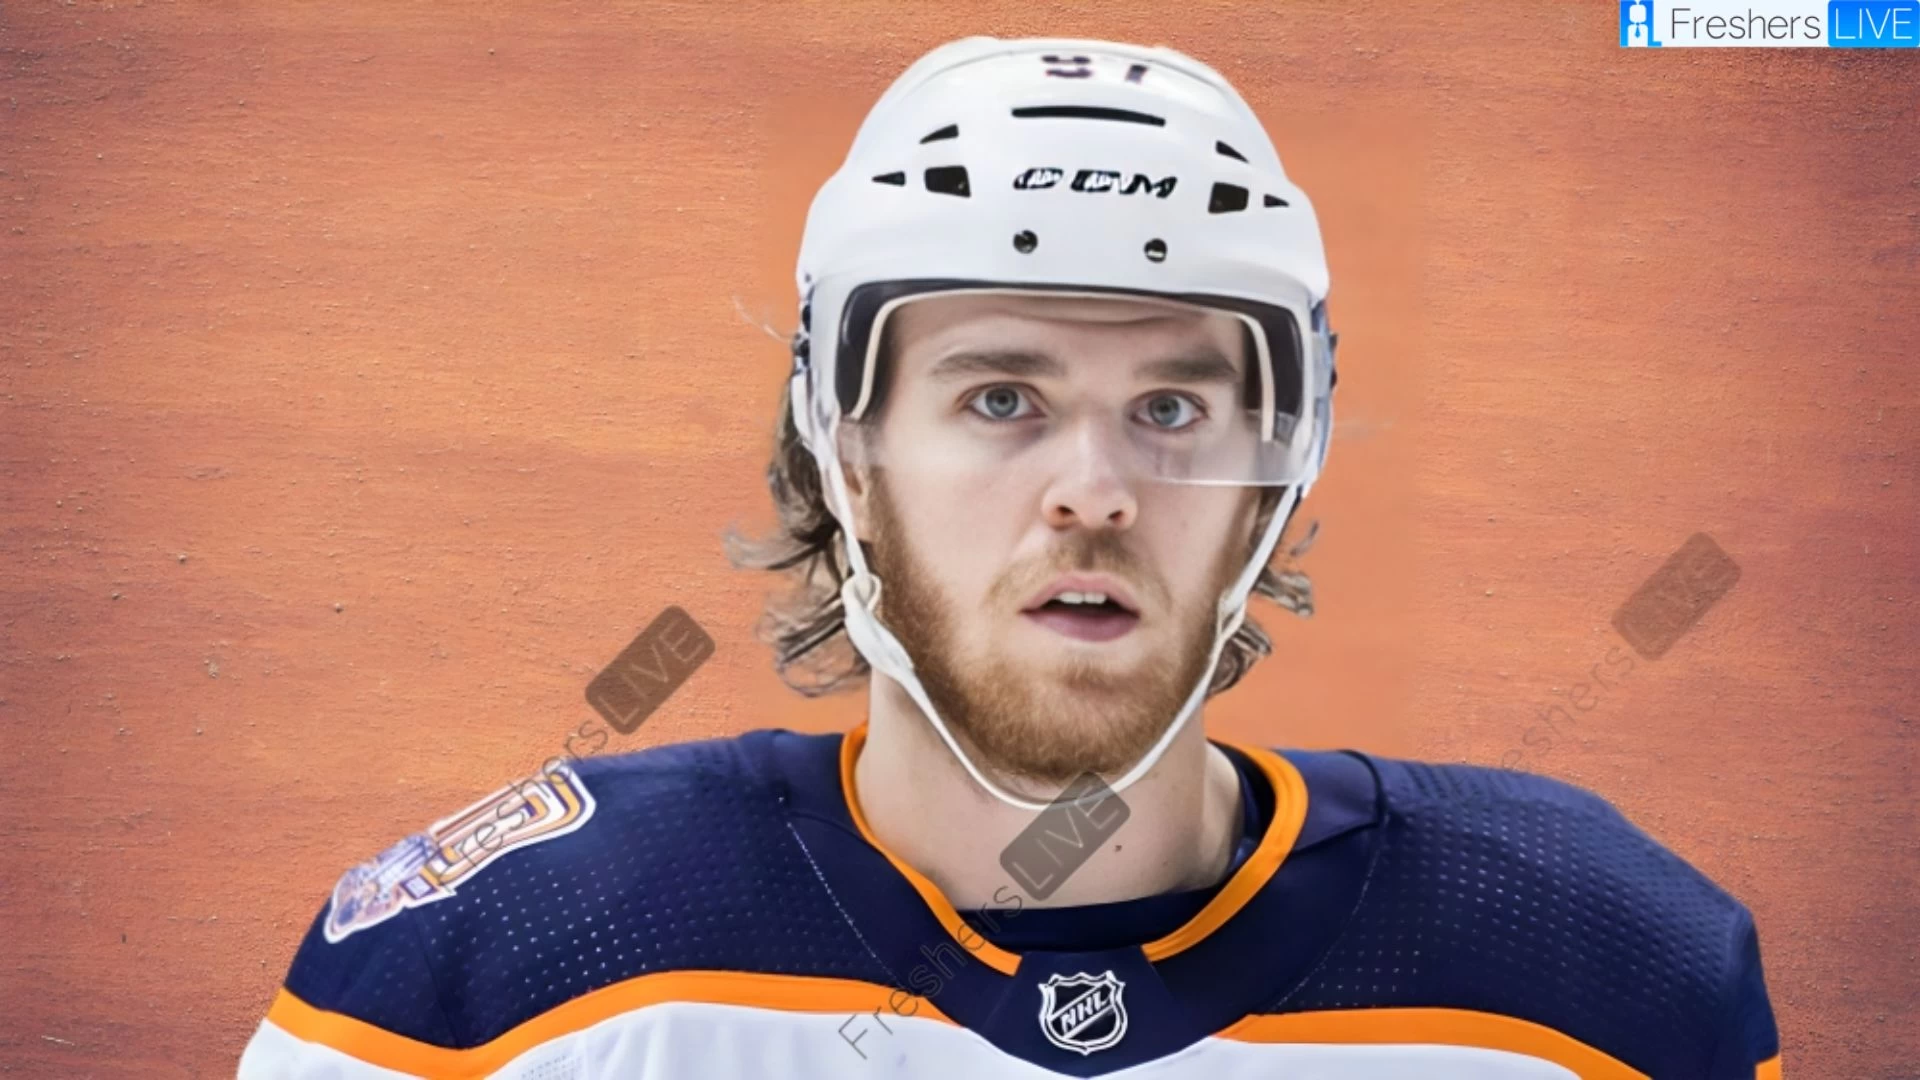 Connor McDavid Religion What Religion is Connor McDavid? Is Connor McDavid a Christian?